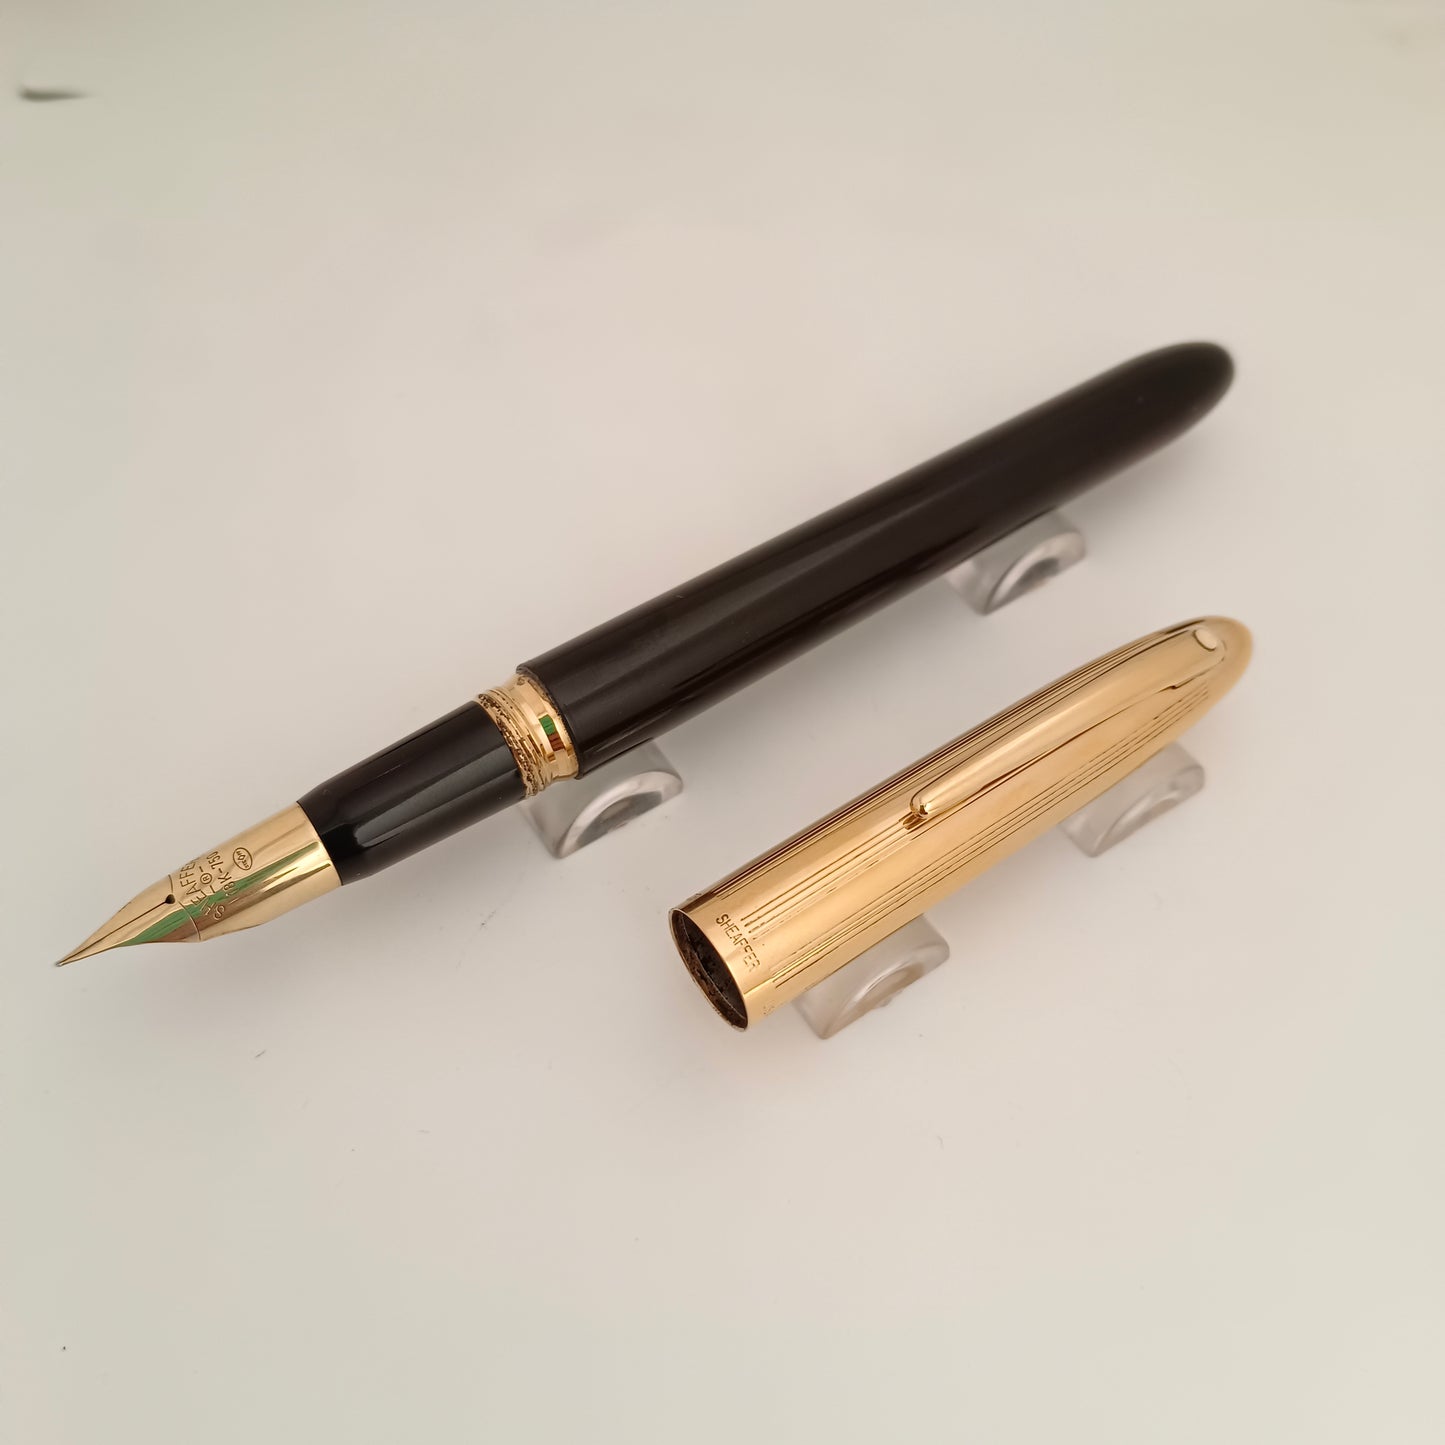 Sheaffer Crest 593 Black with gold Electroplated cap Fountain Pen